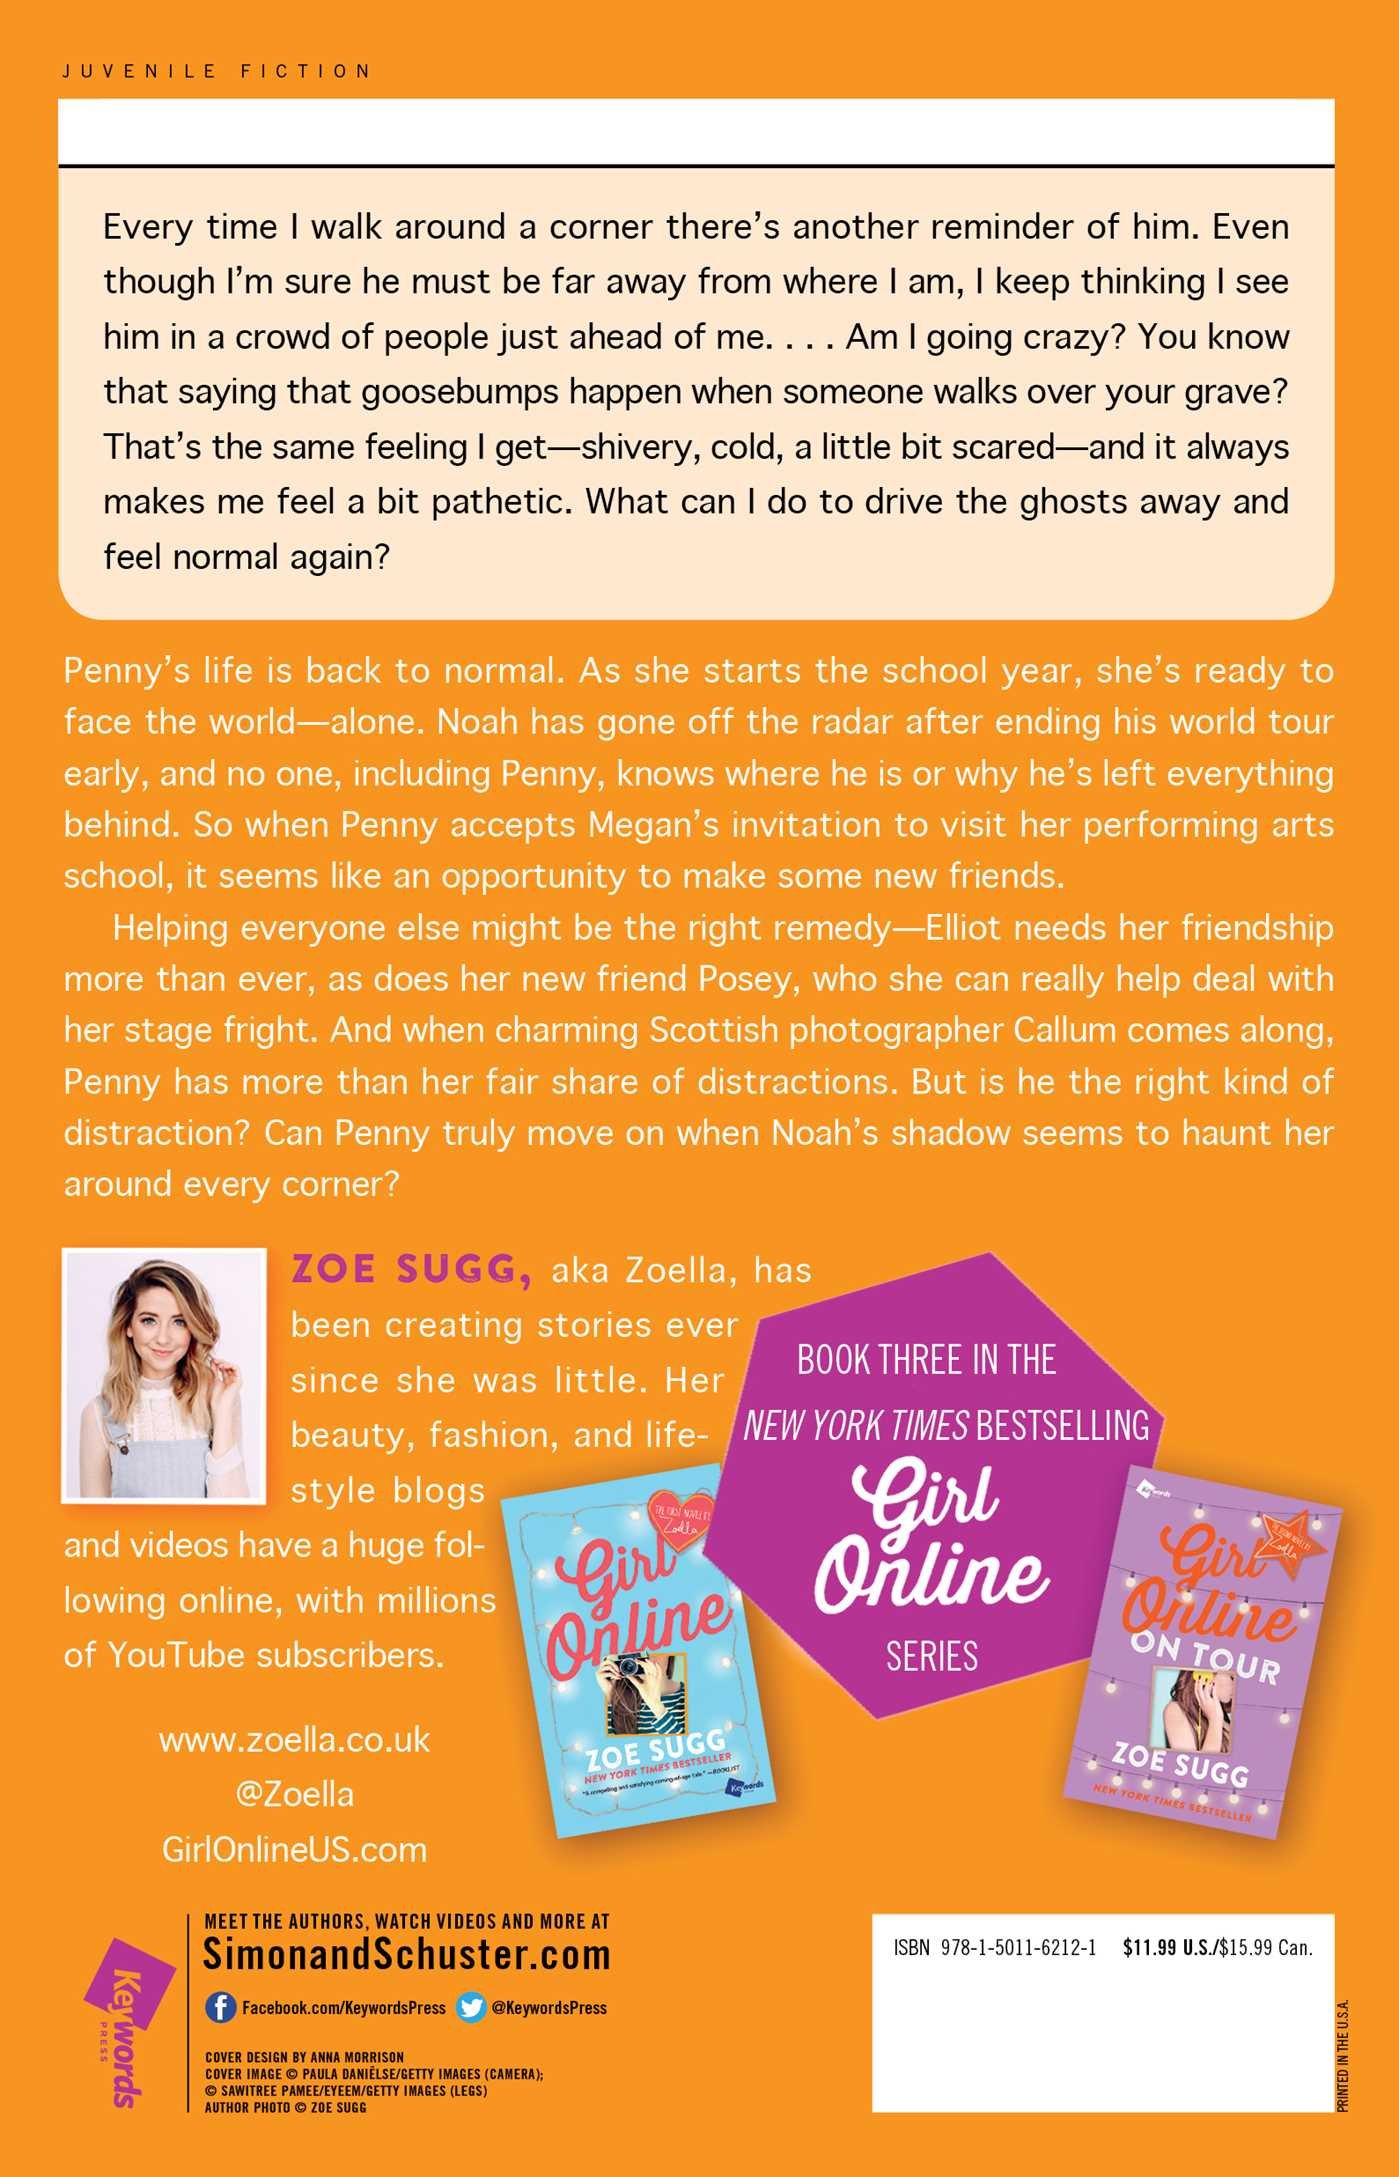 Amazon.com: Girl Online: Going Solo: The Third Novel by Zoella (Girl ...